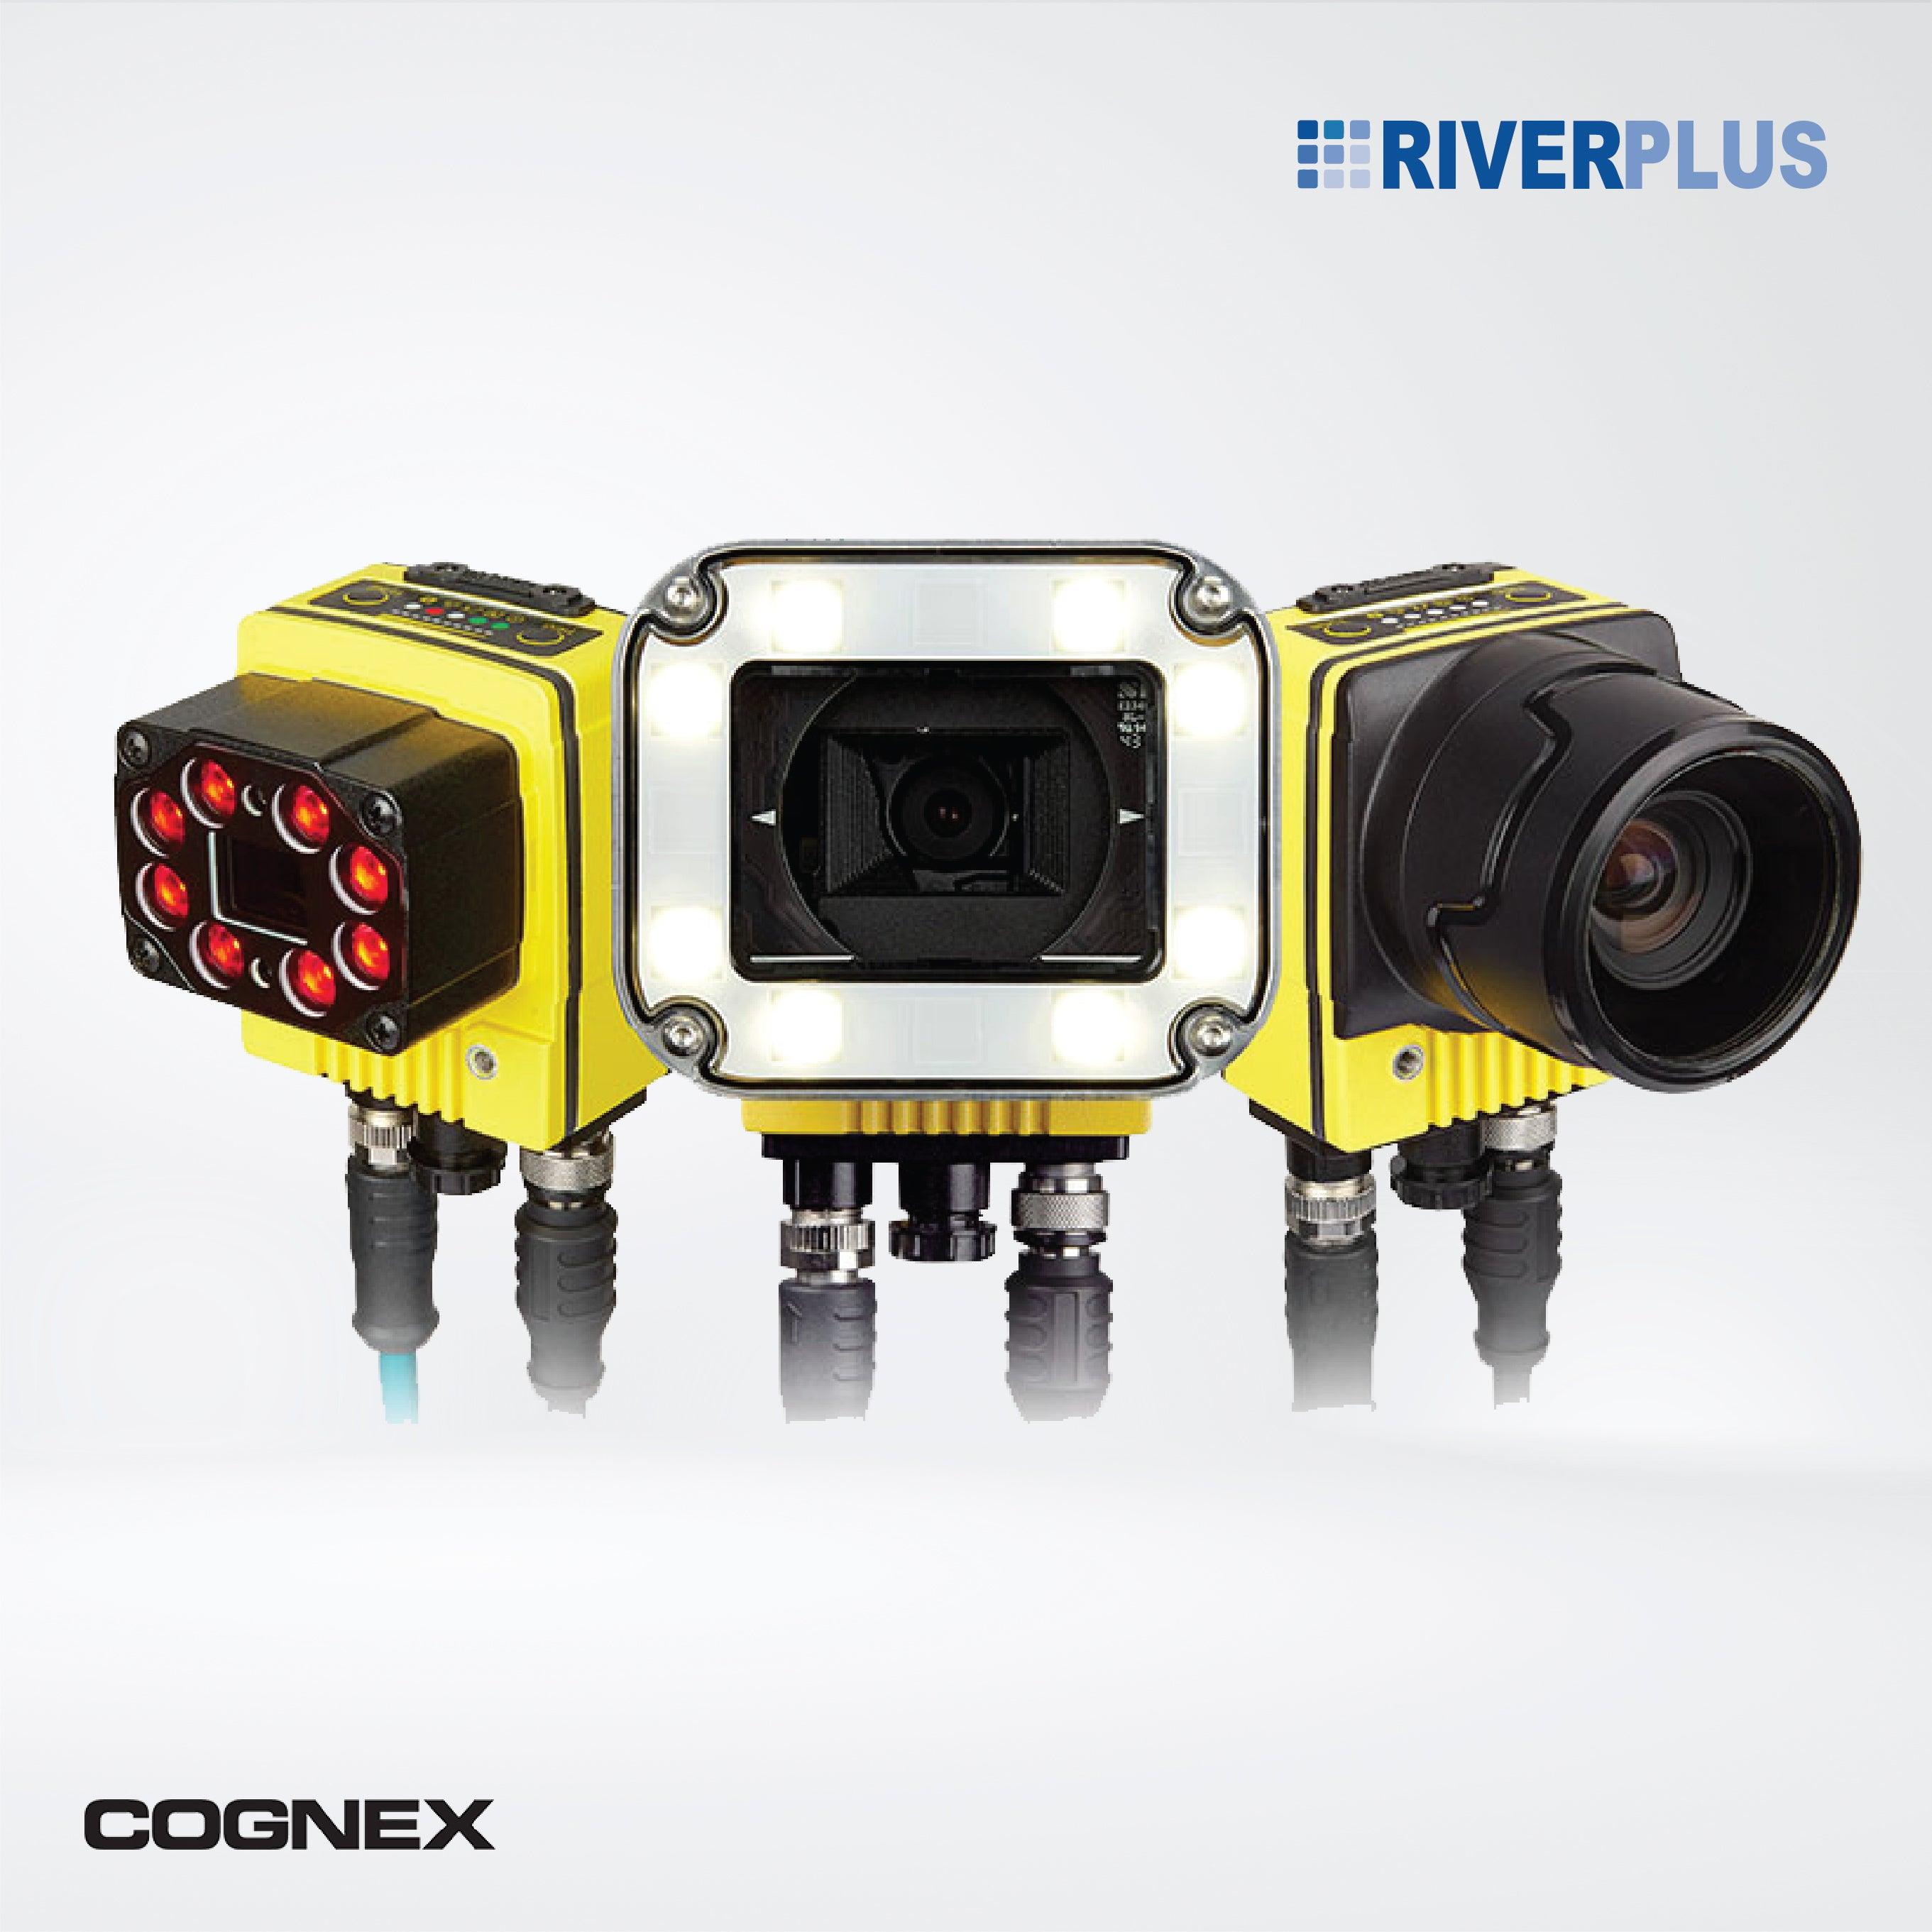 In-Sight 7000 vision system , Rugged, industrial cameras for high performance machine vision applications - Riverplus